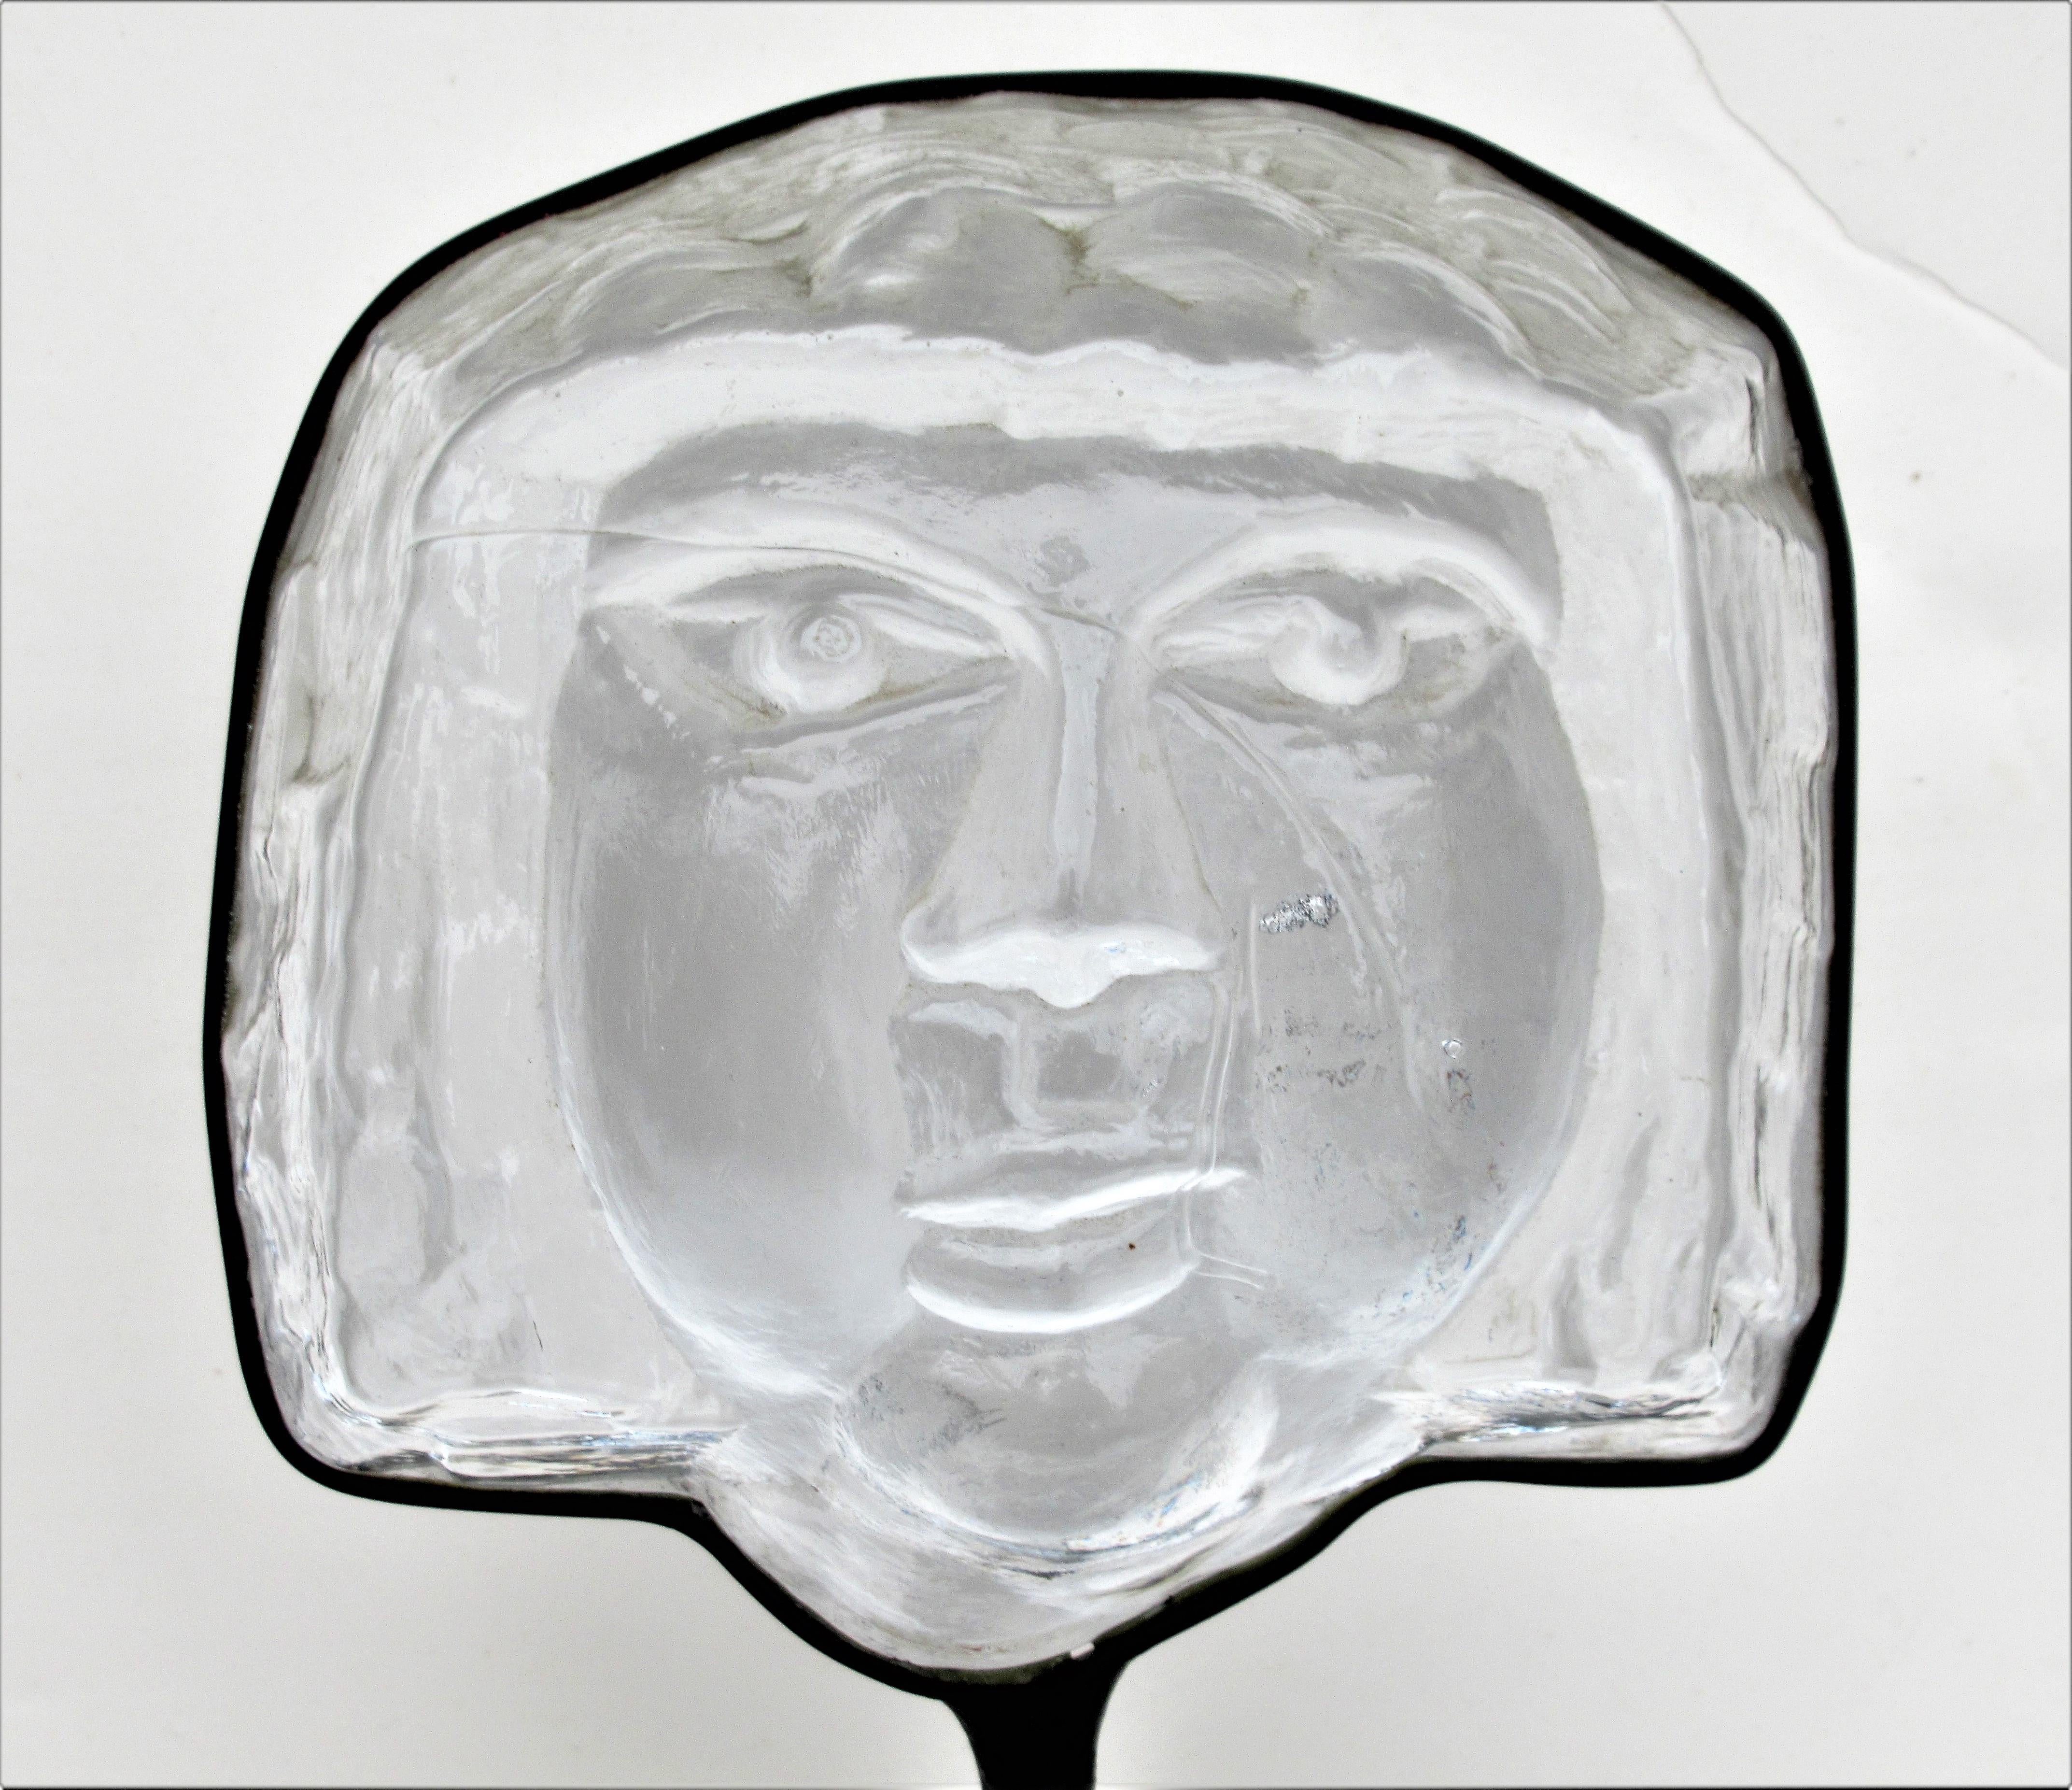 Glass face sculpture mounted in original black enameled iron frame with Stand by Erik Hoglund for Kosta Boda – Sweden, circa 1960. Marked Boda on underside of circular iron base.